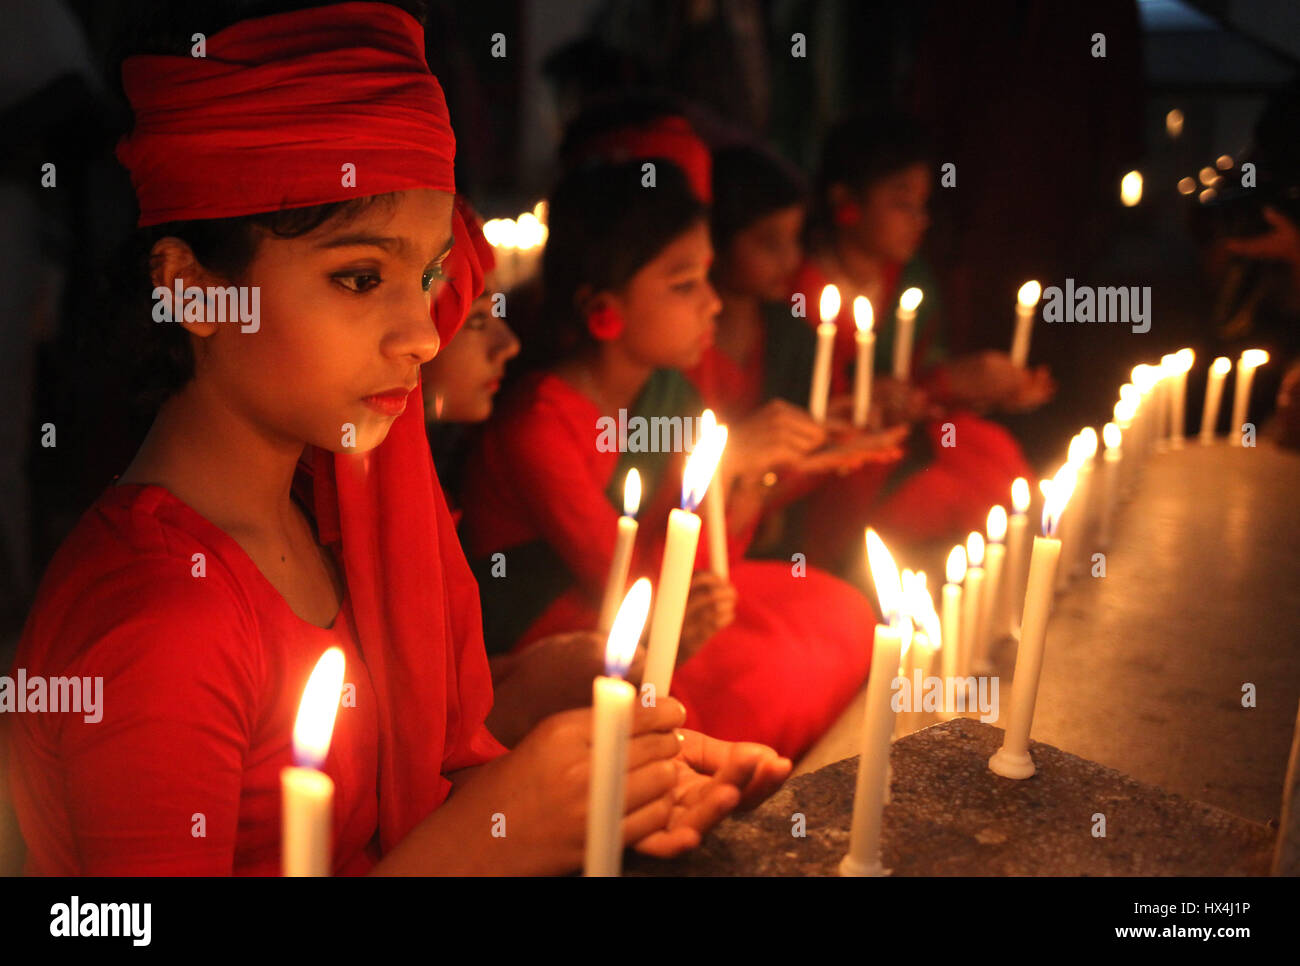 Dhaka, Bangladesh. 25th Mar, 2017. 25 March 2017 Dhaka, Bangladesh - Bangladeshi childran lit candles to remember the victims of ''Operation Searchlight,'' the 1971 military operation carried out by the Pakistan Army to curb the Bengali nationalist movement in the Dhaka City on 25 March 2017. The black night of March 25, 1971 when the Pakistani occupation forces kicked off one of the worst genocides in history that led to a nine-month war for the independence of Bangladesh in 1971. Credit: ZUMA Press, Inc./Alamy Live News Stock Photo